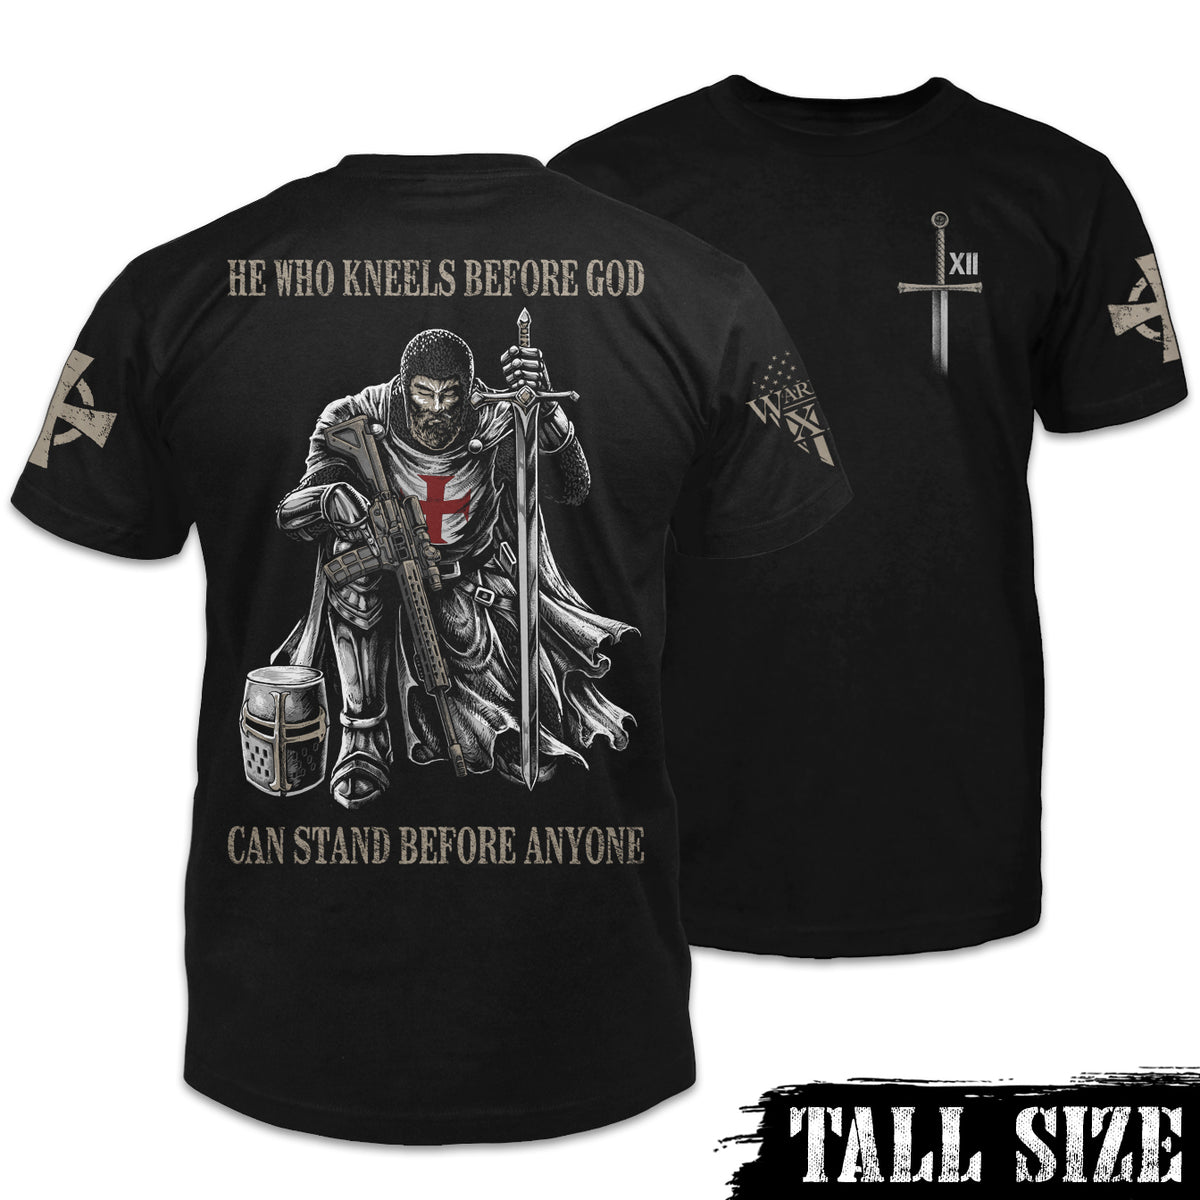 Front & back black tall size shirt with the words "He who kneels before God can stand before anyone" with a knights templar kneeling holding a sword printed on the shirt.